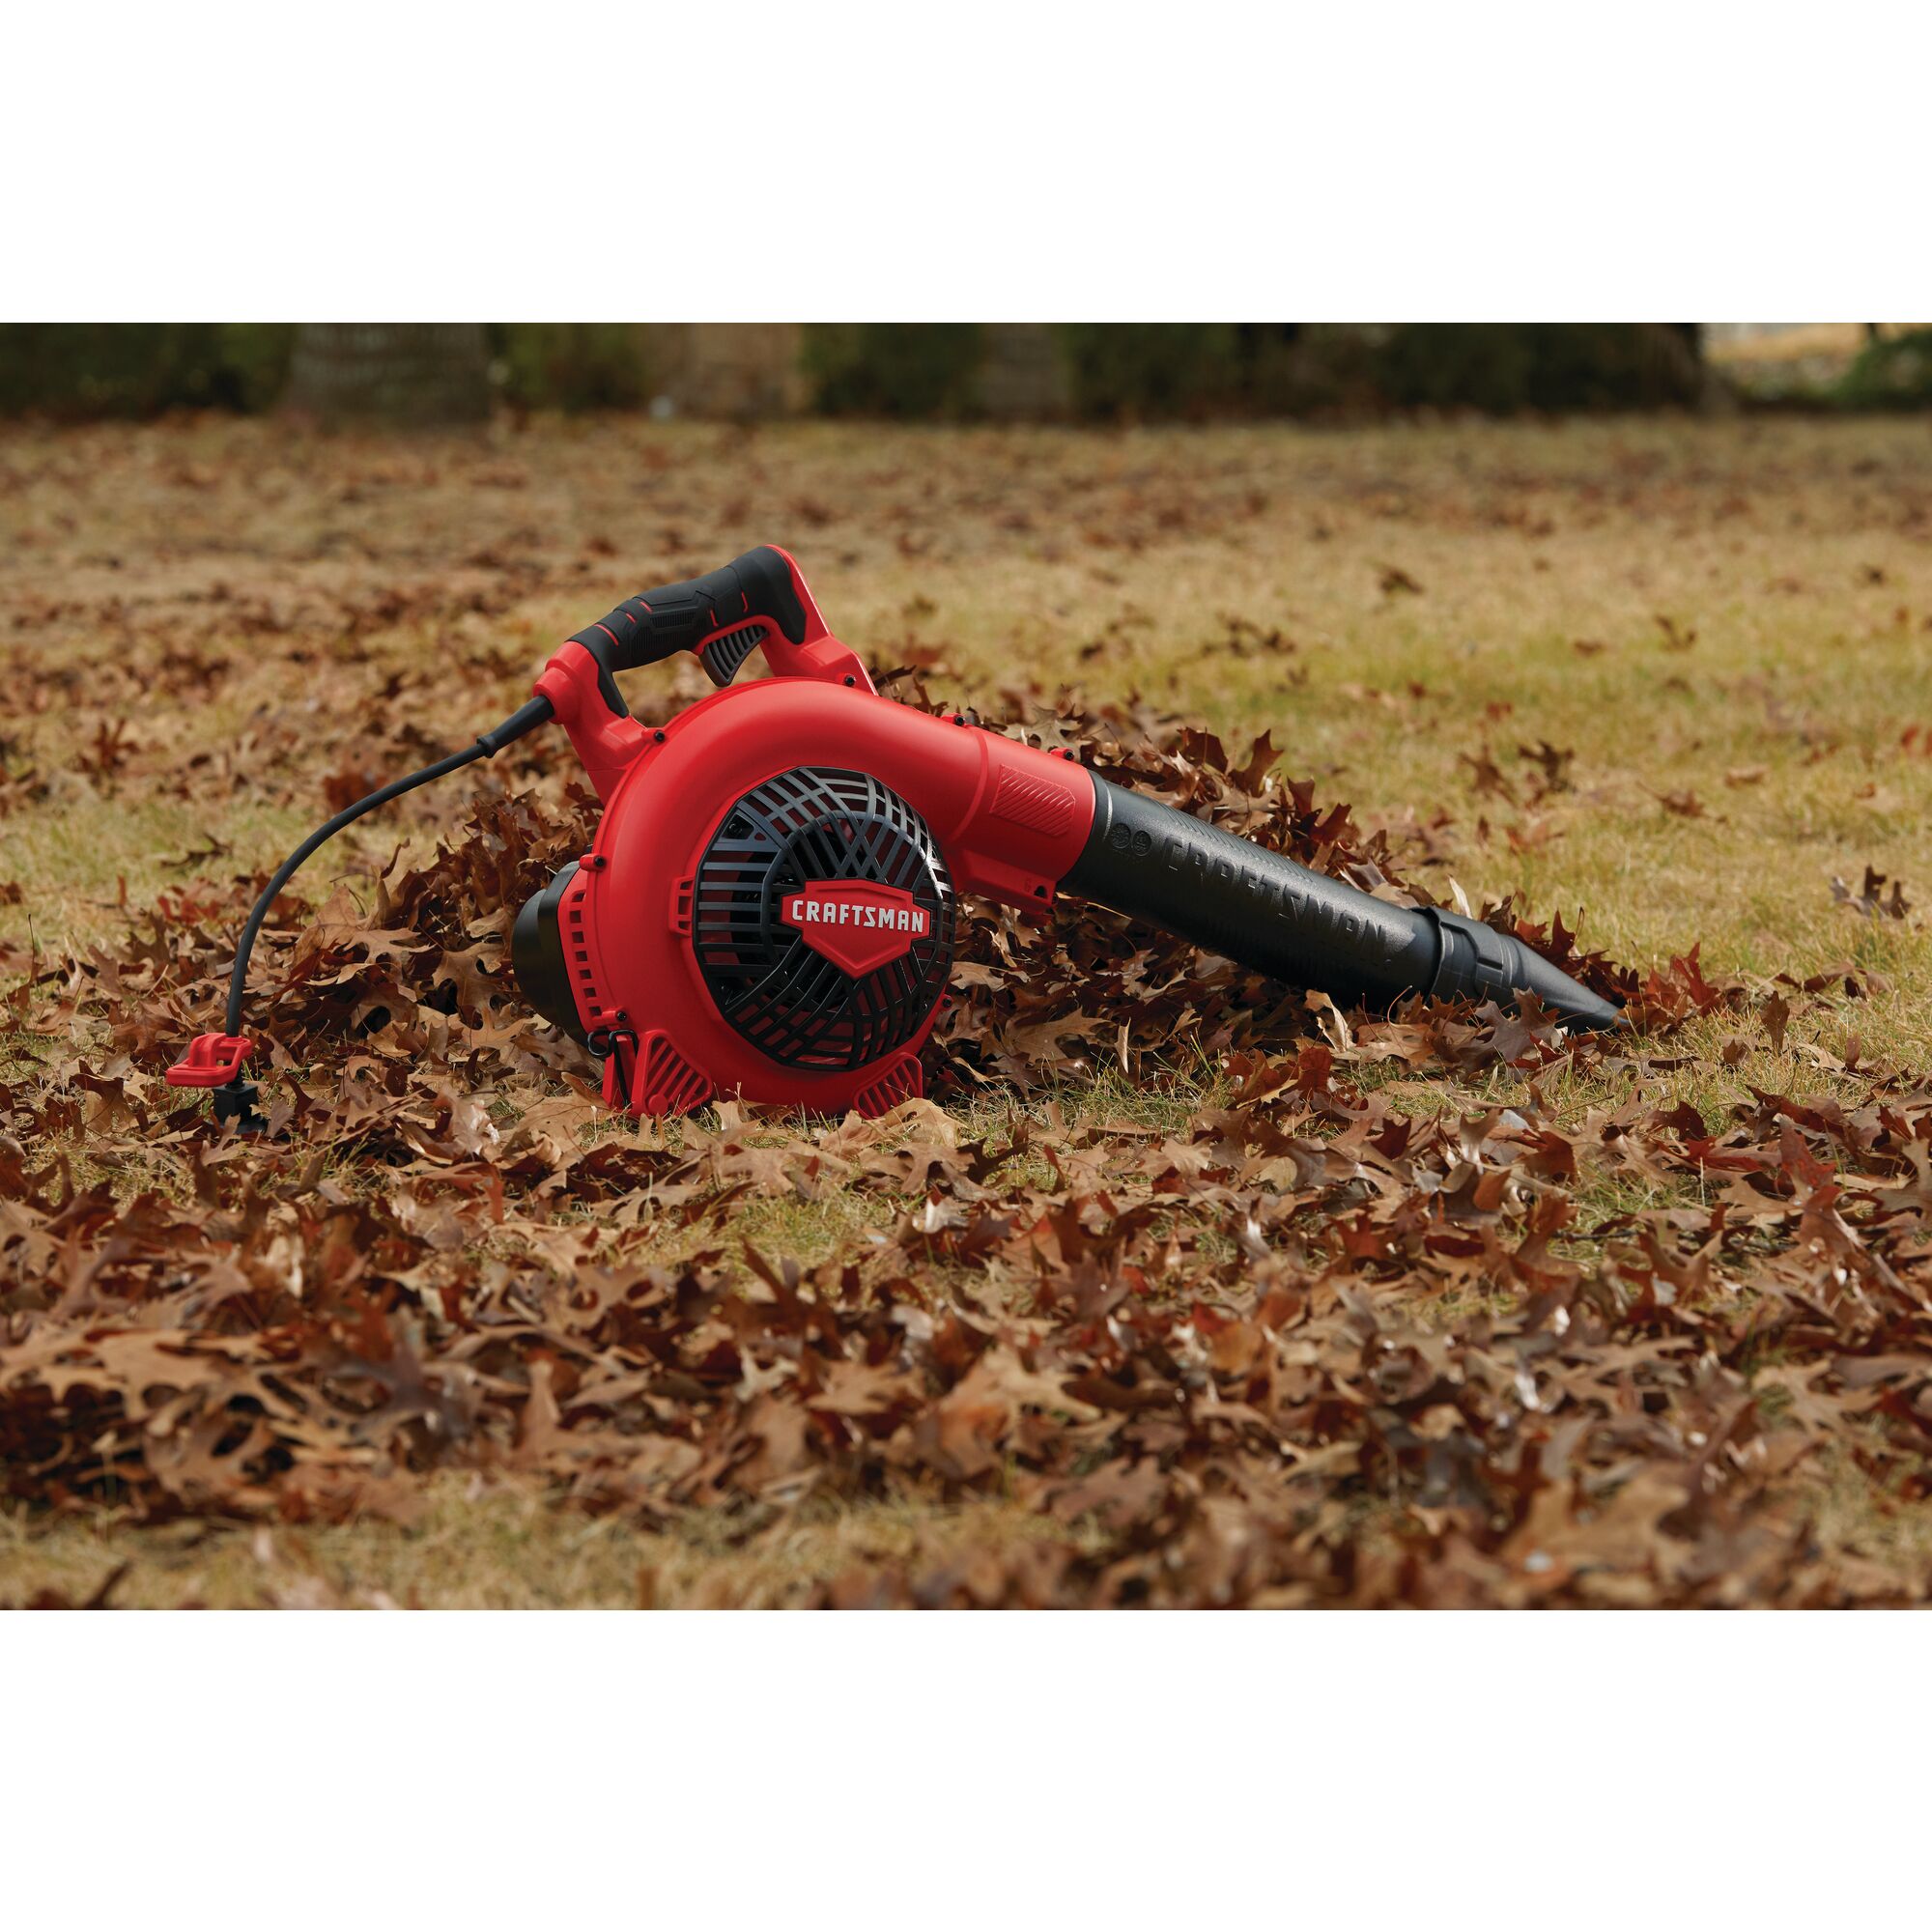 12 amp corded handheld jobsite blower being used in a lawn.